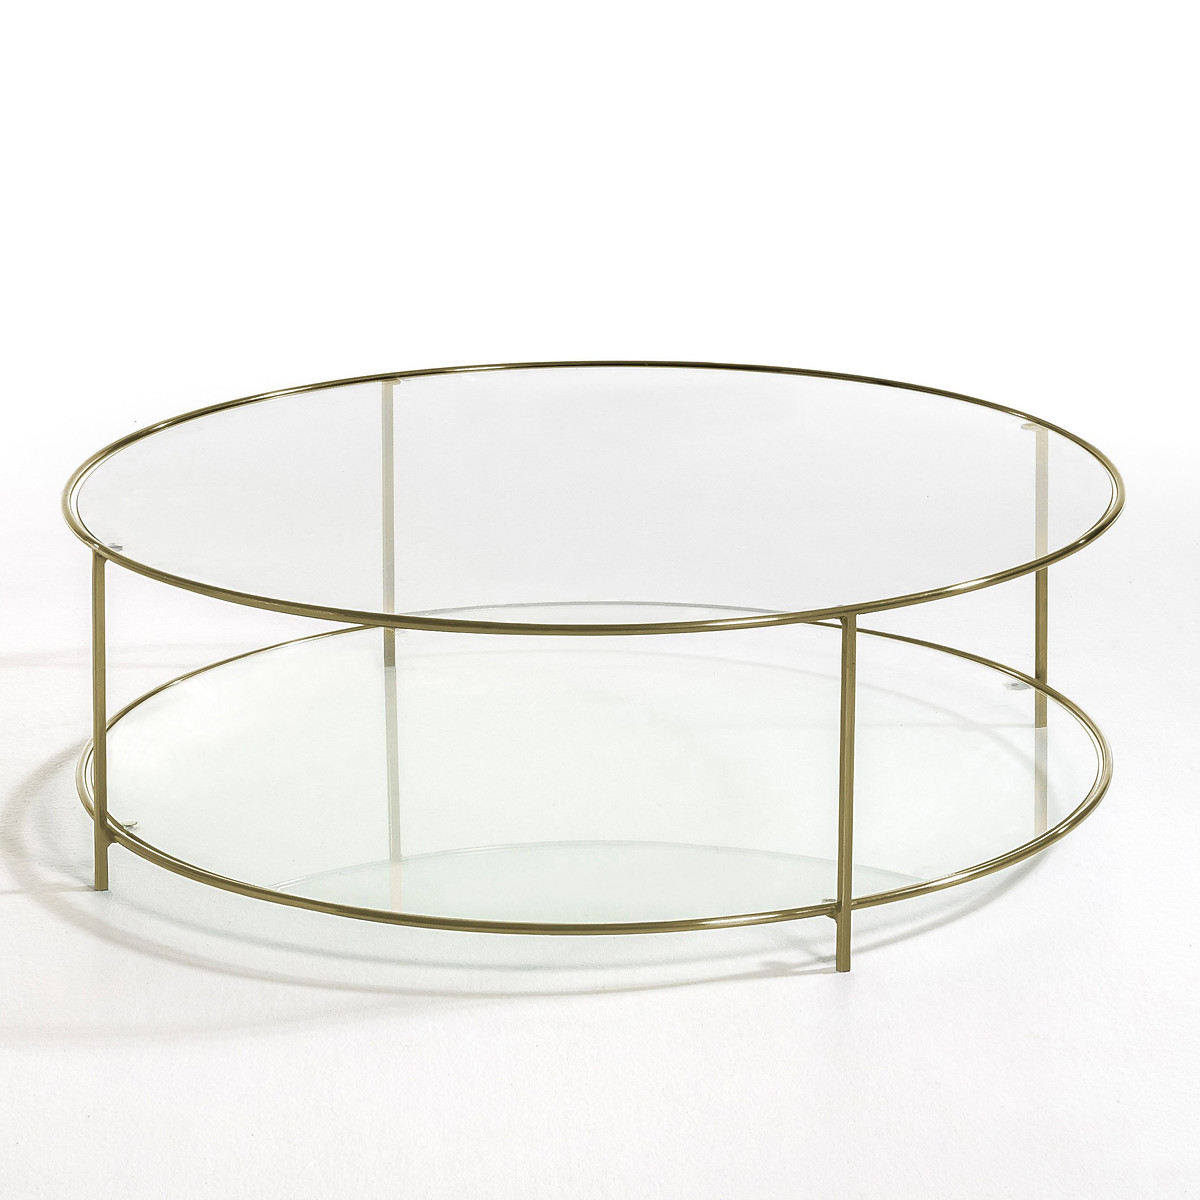 Sybil Tempered Glass Round Coffee Table